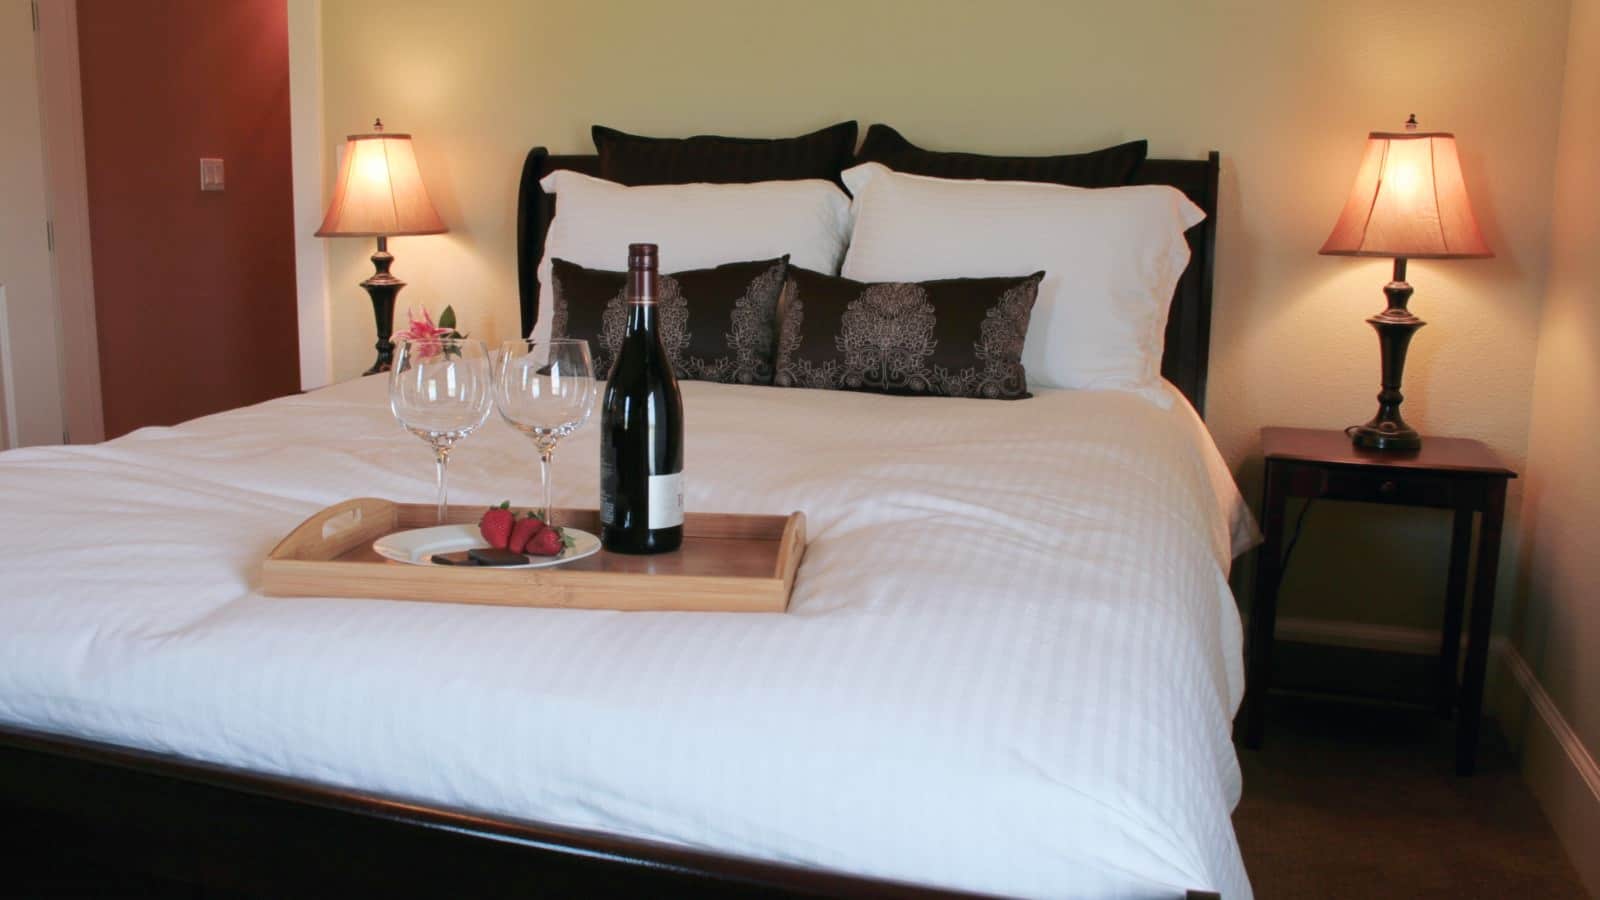 Bedroom with light colored walls, carpeting, dark headboard, white bedding, and wooden tray on bed with fruit, chocolate and wine